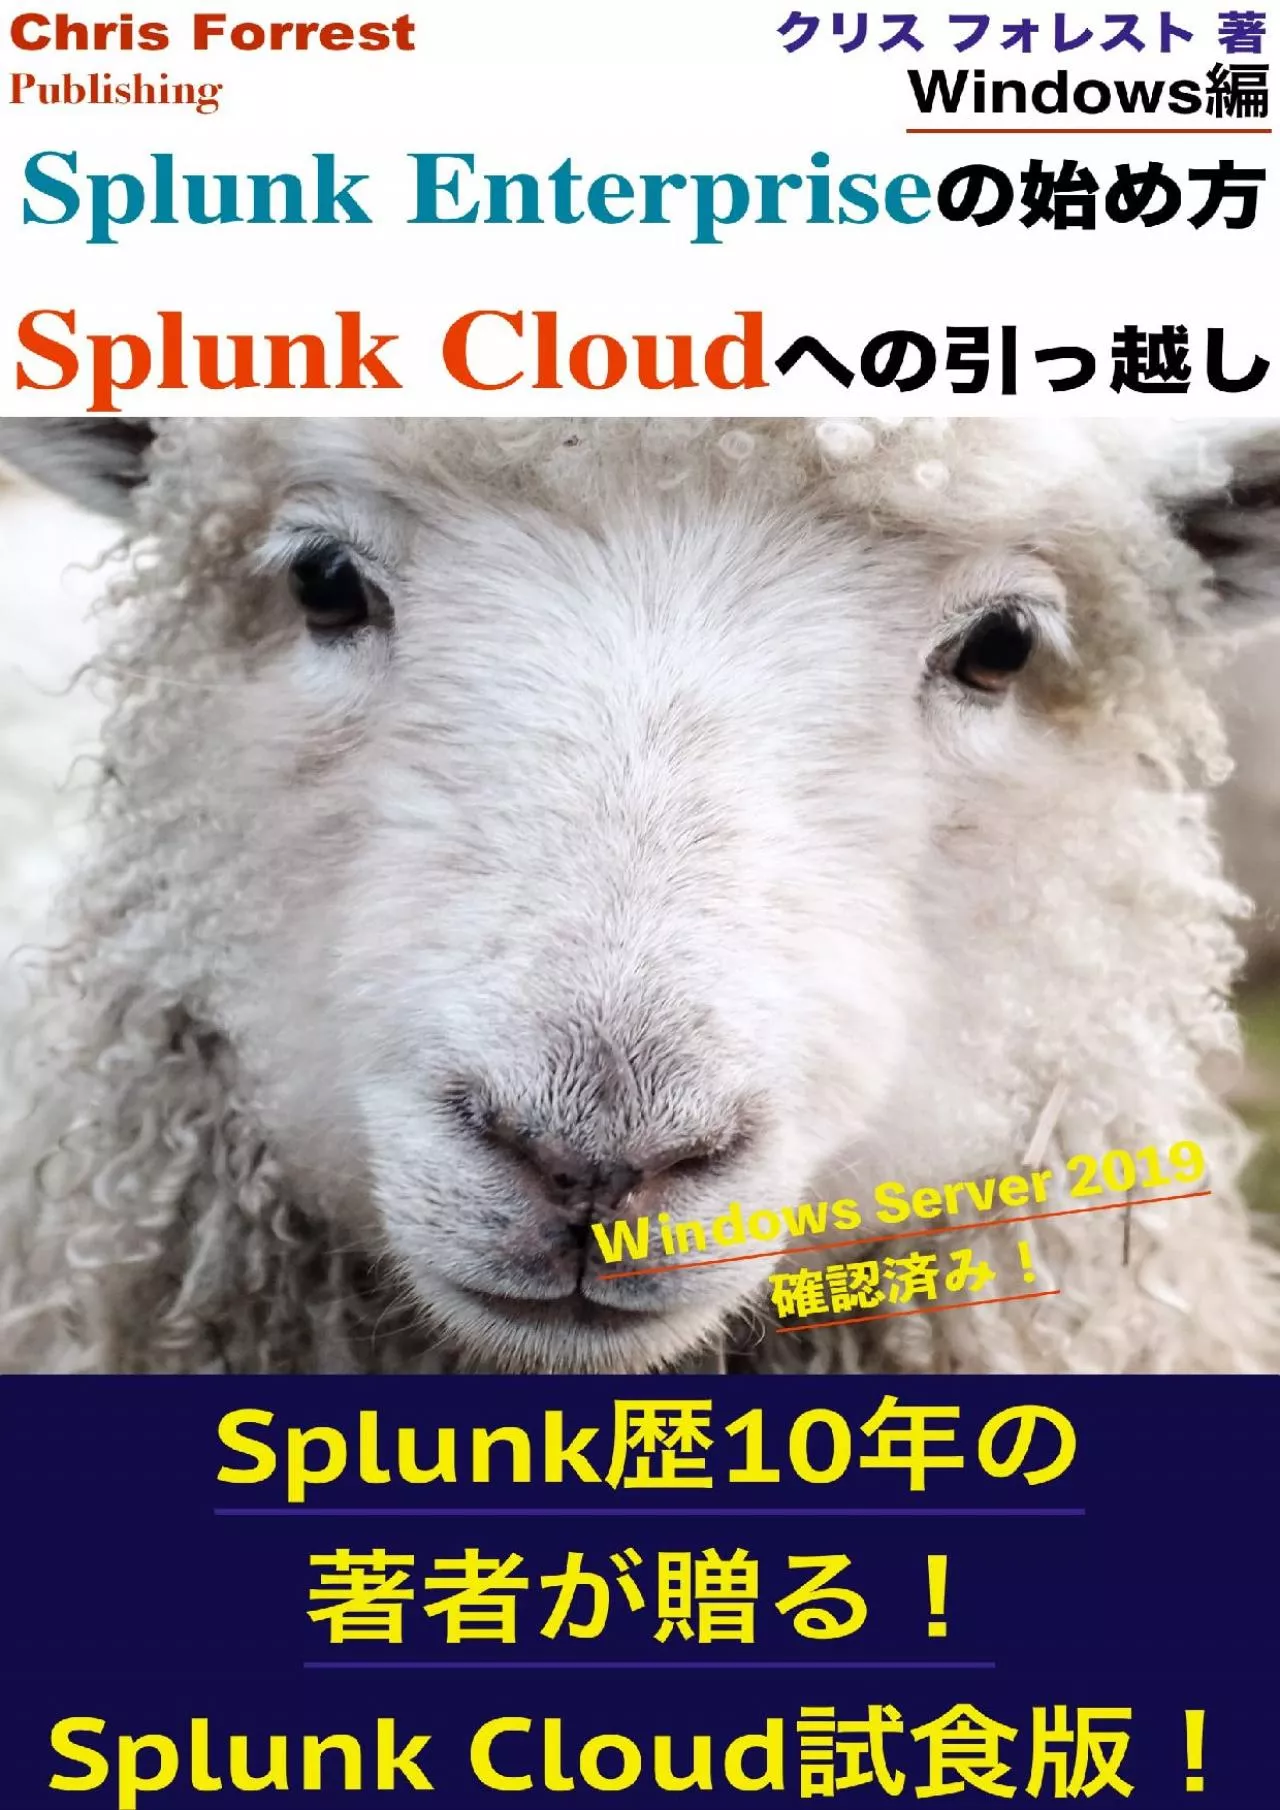 How to start Splunk Enterprise How to move to Splunk Cloud Windows Chris Forrest Publishing